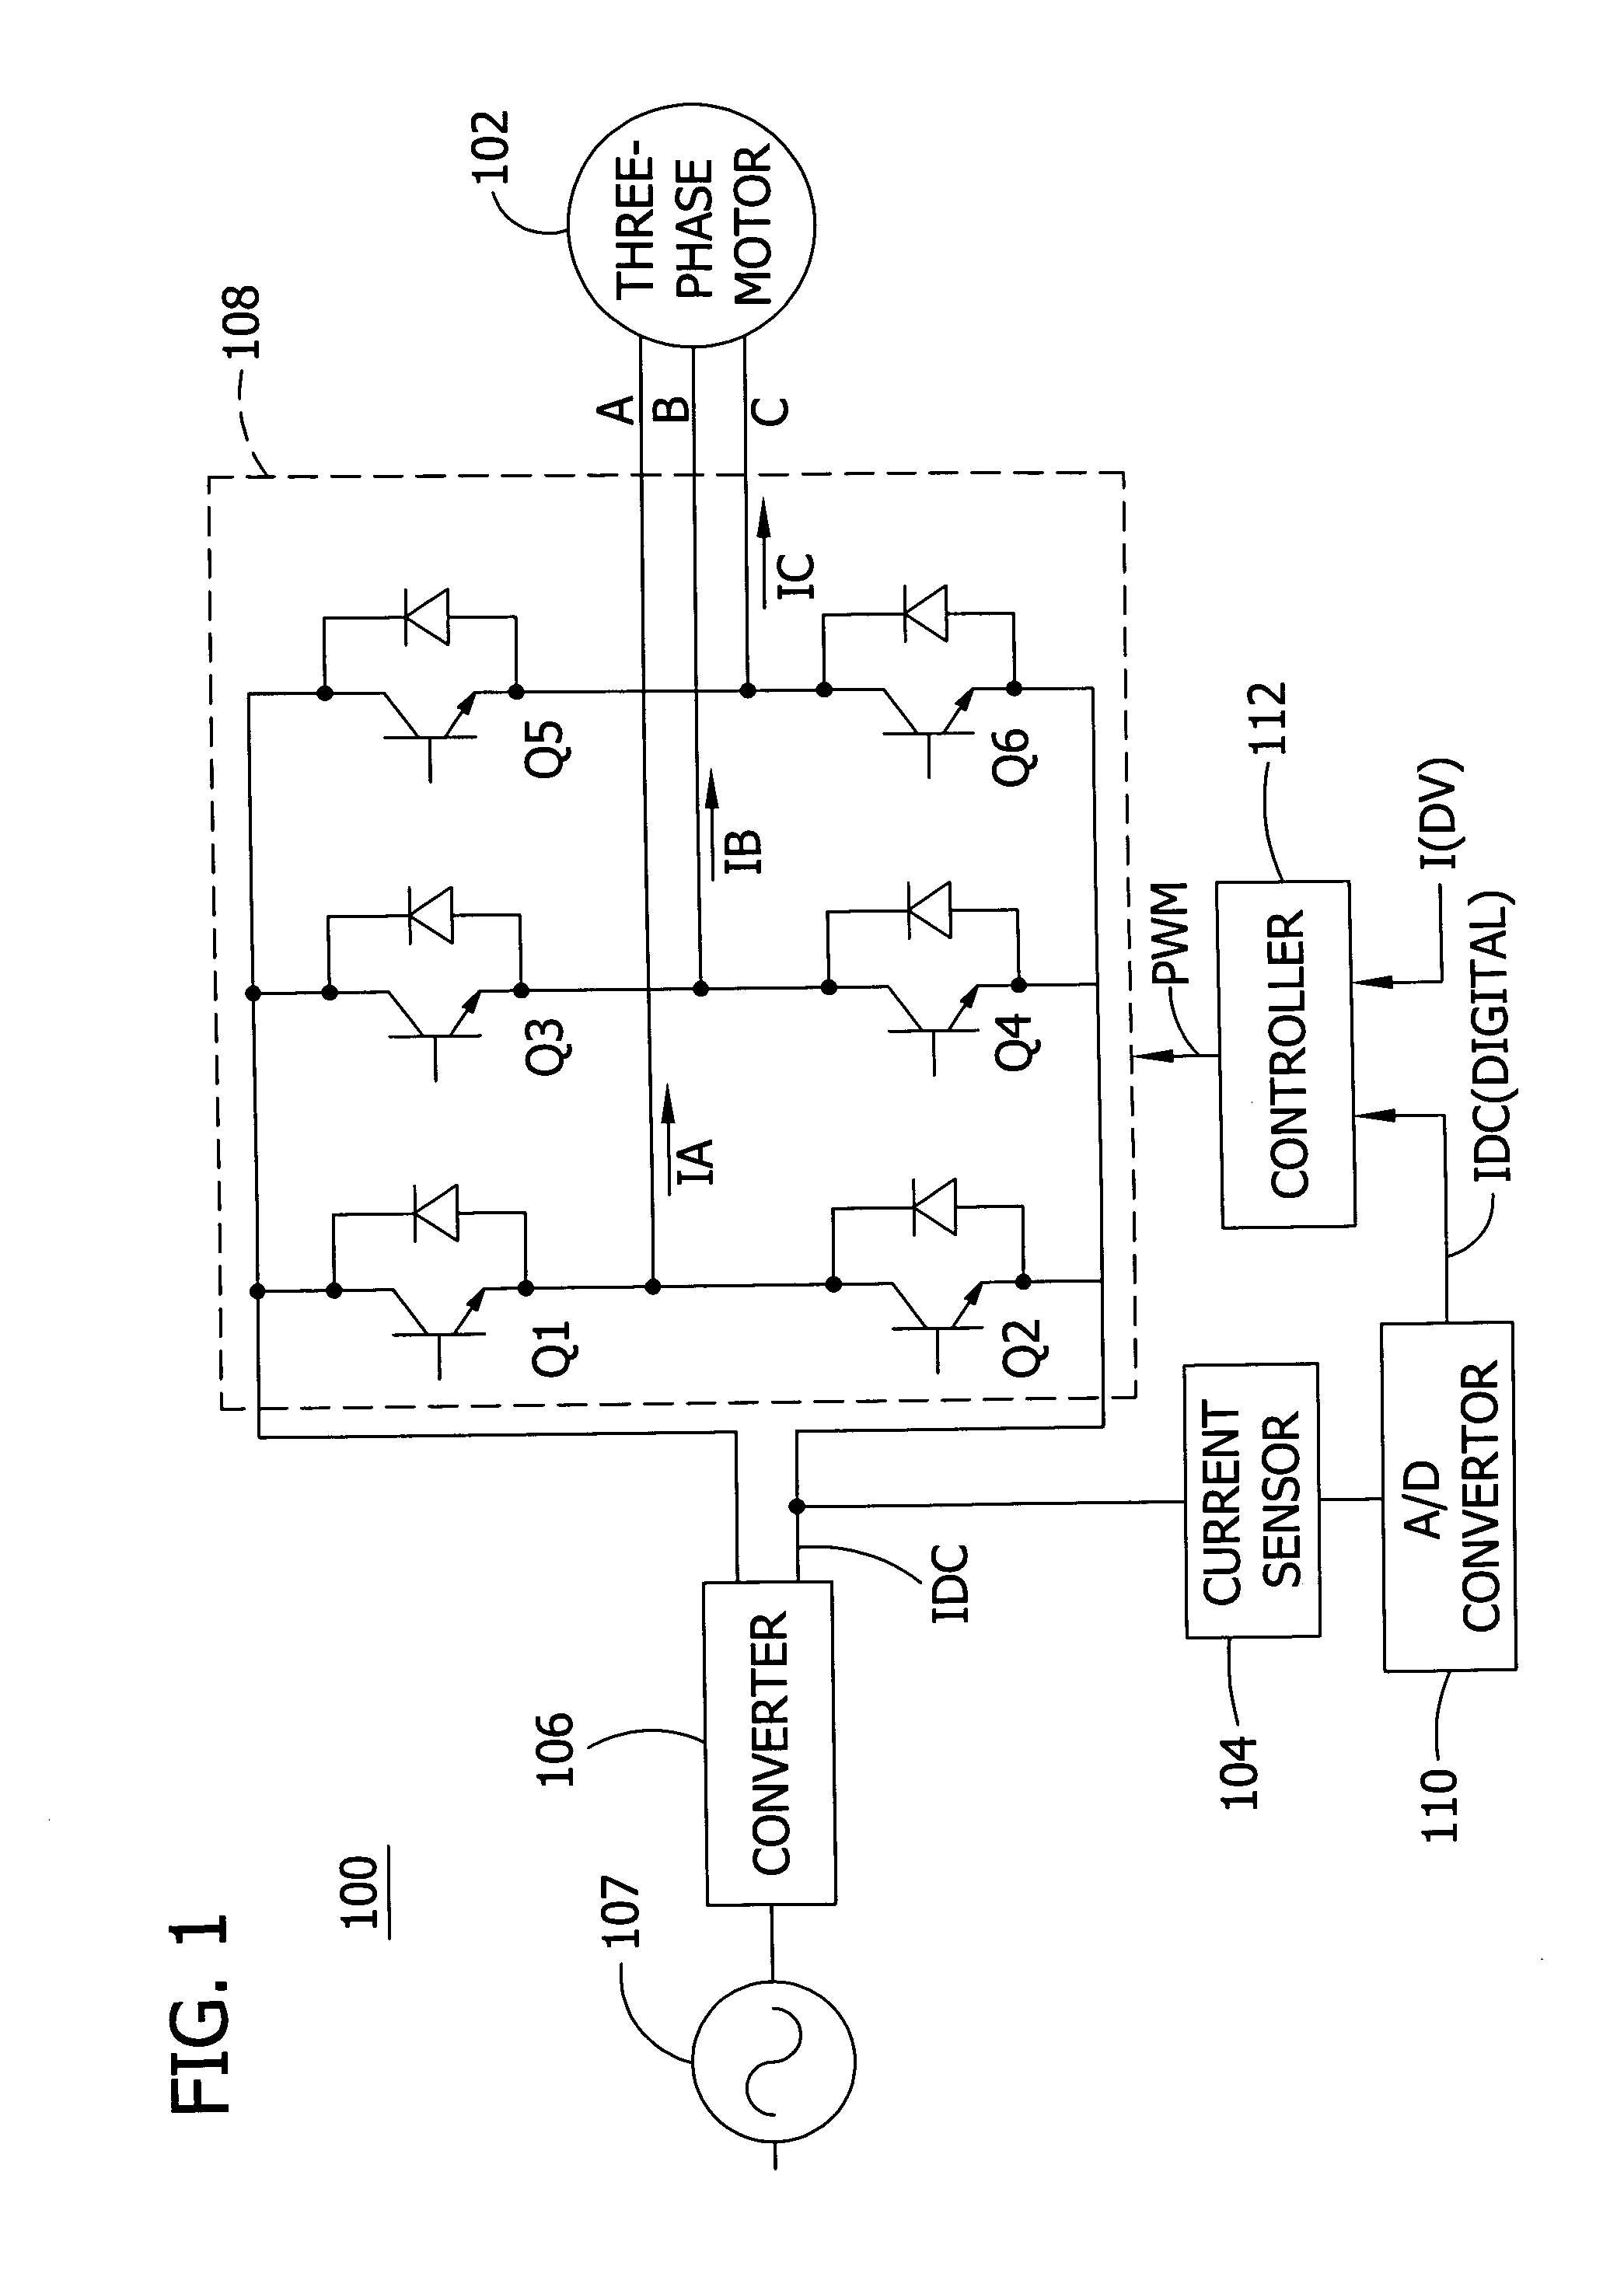 Offset PWM signals for multiphase motor